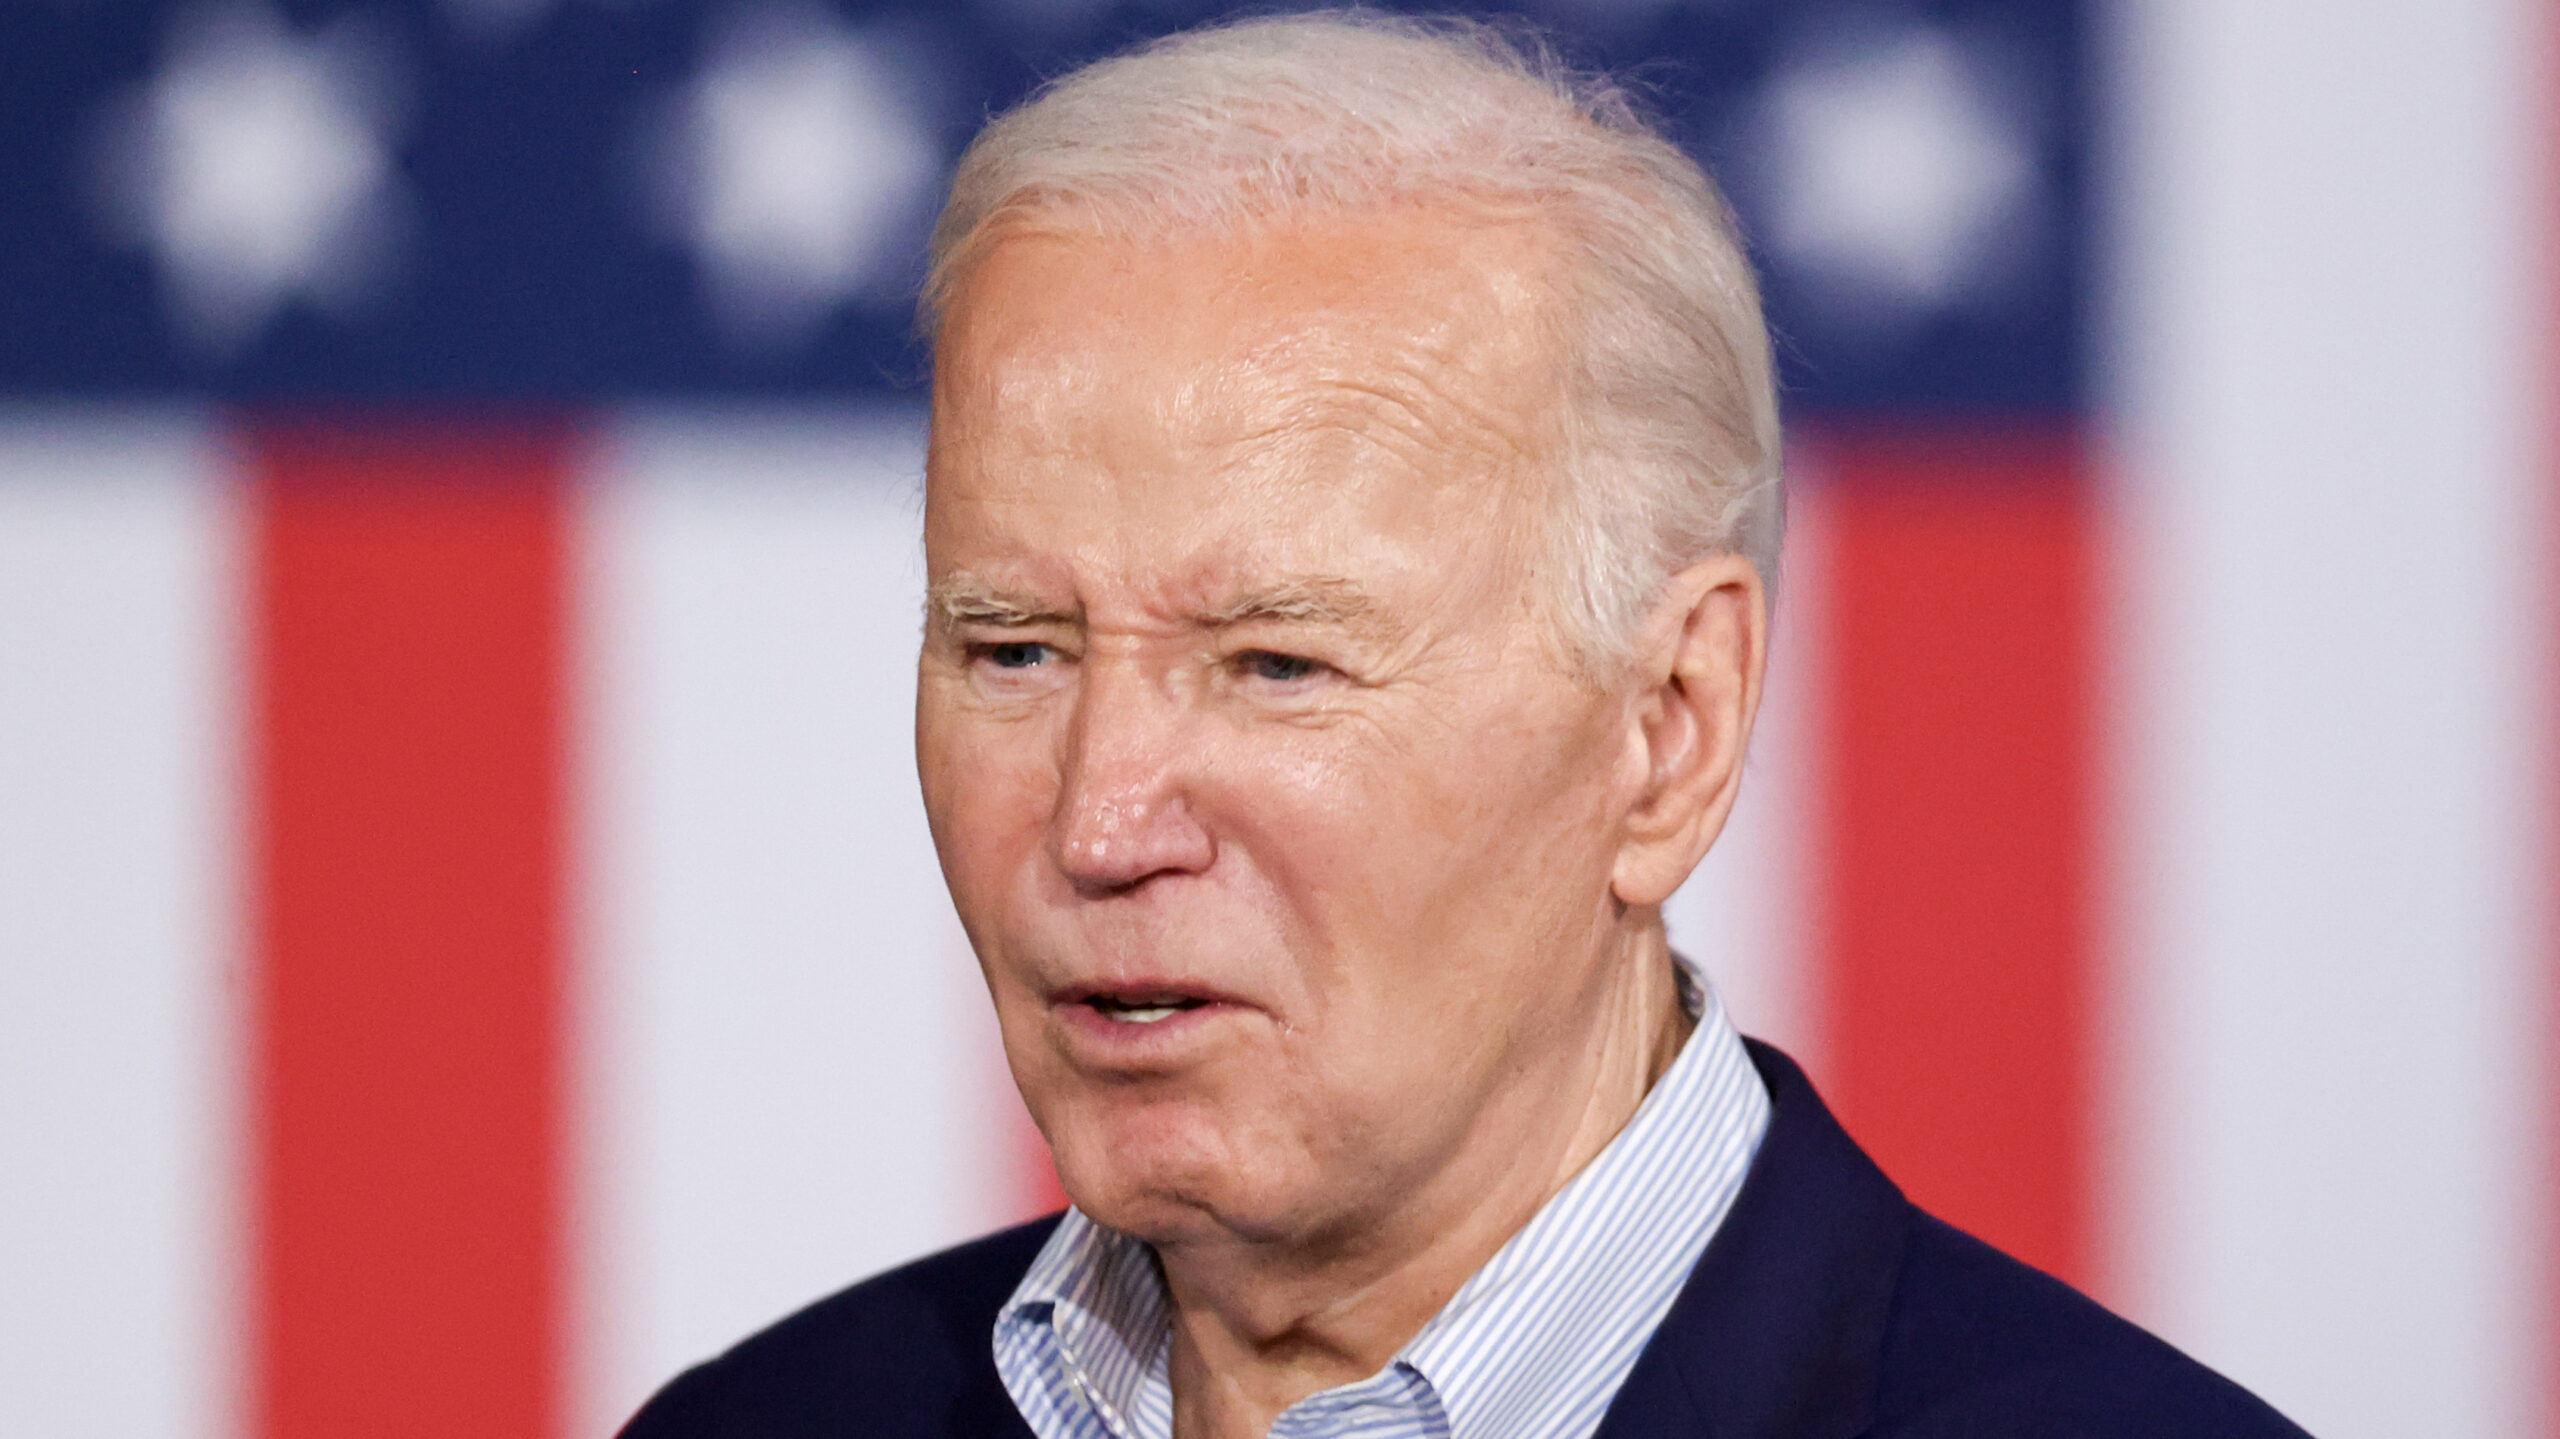 Criticism Towards Biden Surfaces Following Attack on National Guard Troops by Illegal Aliens in Texas